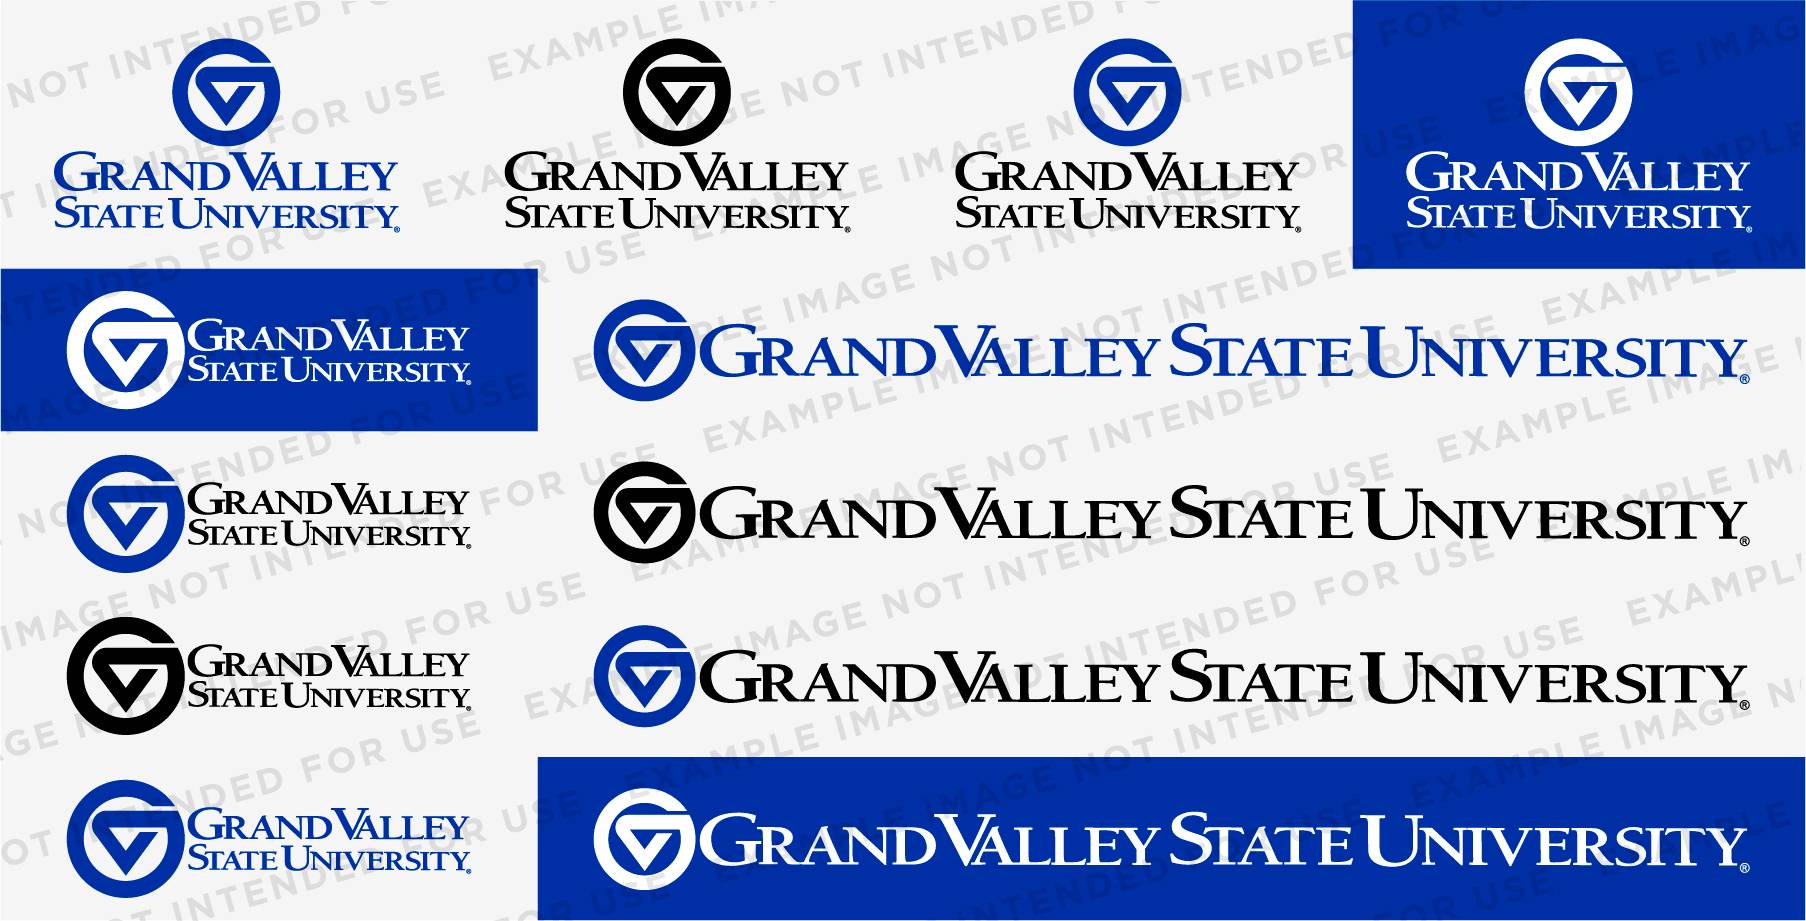 The various Grand Valley logos included in the logo pack.